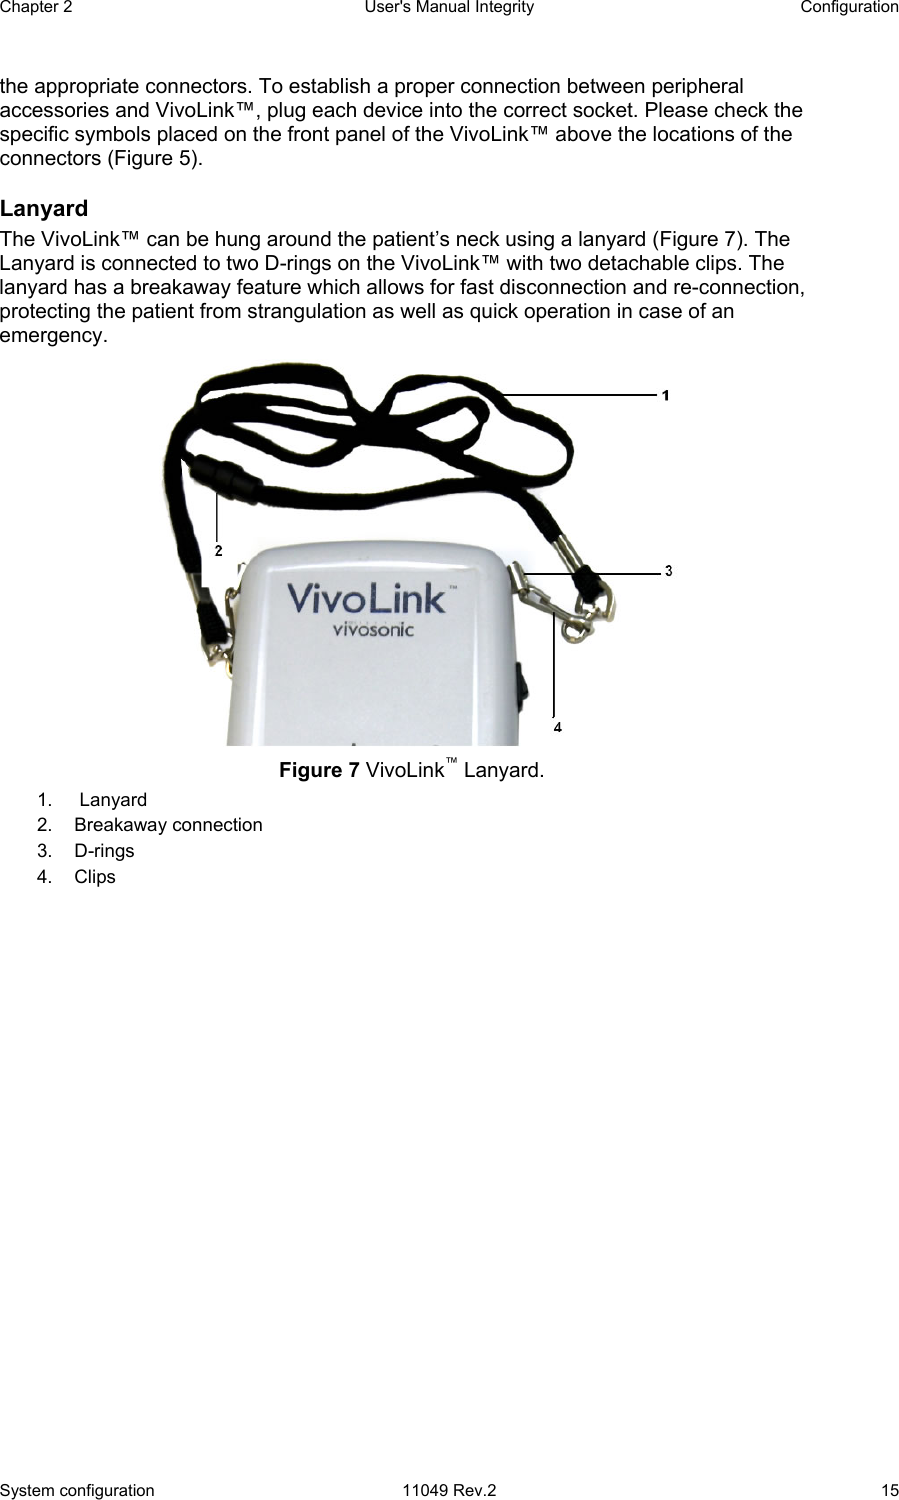 Chapter 2  User&apos;s Manual Integrity  Configuration System configuration  11049 Rev.2  15 the appropriate connectors. To establish a proper connection between peripheral accessories and VivoLink™, plug each device into the correct socket. Please check the specific symbols placed on the front panel of the VivoLink™ above the locations of the connectors (Figure 5). Lanyard The VivoLink™ can be hung around the patient’s neck using a lanyard (Figure 7). The Lanyard is connected to two D-rings on the VivoLink™ with two detachable clips. The lanyard has a breakaway feature which allows for fast disconnection and re-connection, protecting the patient from strangulation as well as quick operation in case of an emergency.   Figure 7 VivoLink™ Lanyard. 1.   Lanyard   2.  Breakaway connection  3. D-rings  4. Clips 